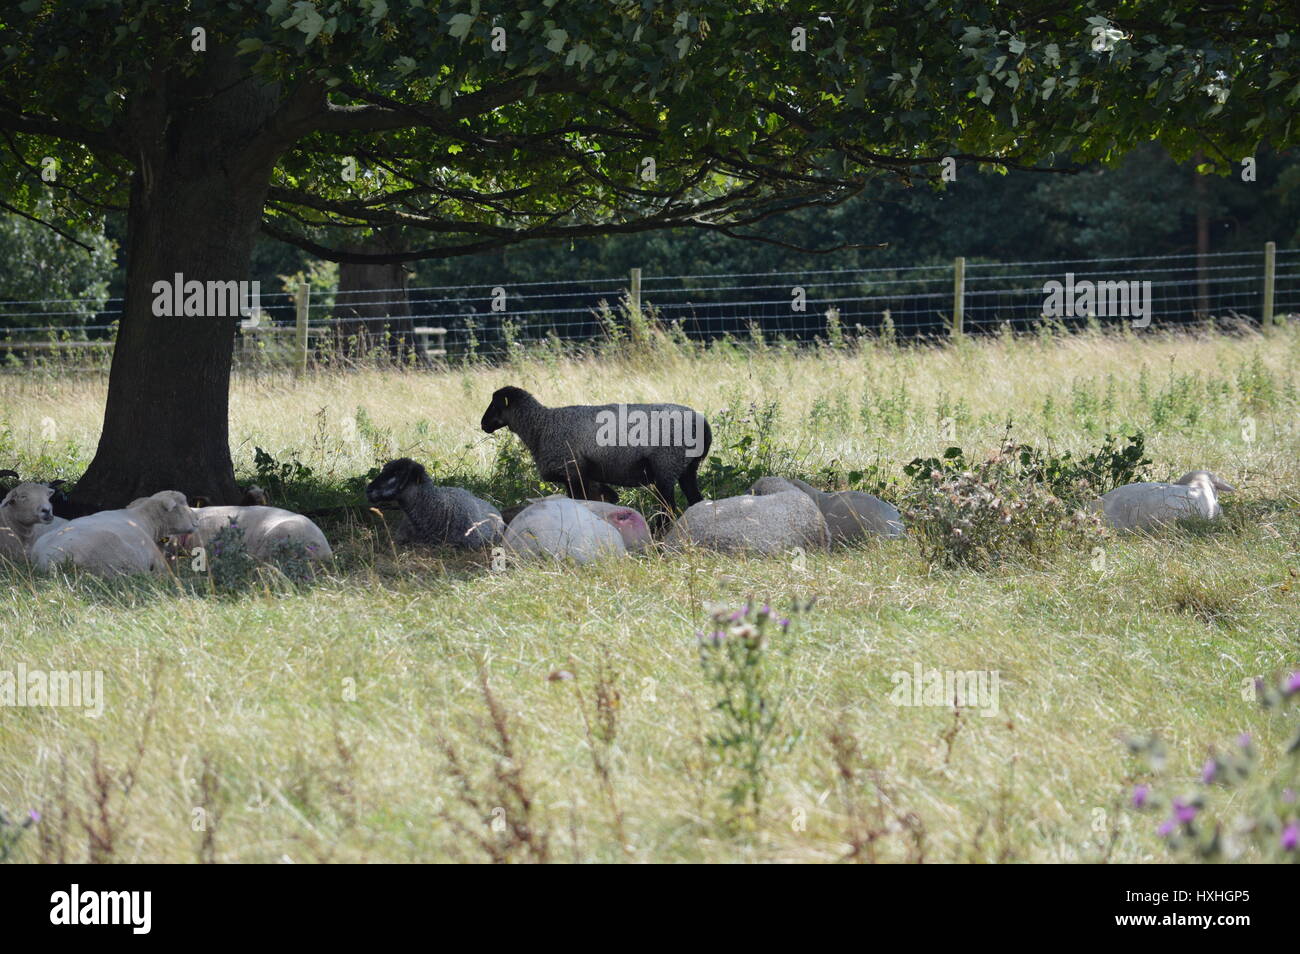 One sheep standing up with sleeping sheep surrounding it in a field under a tree Stock Photo